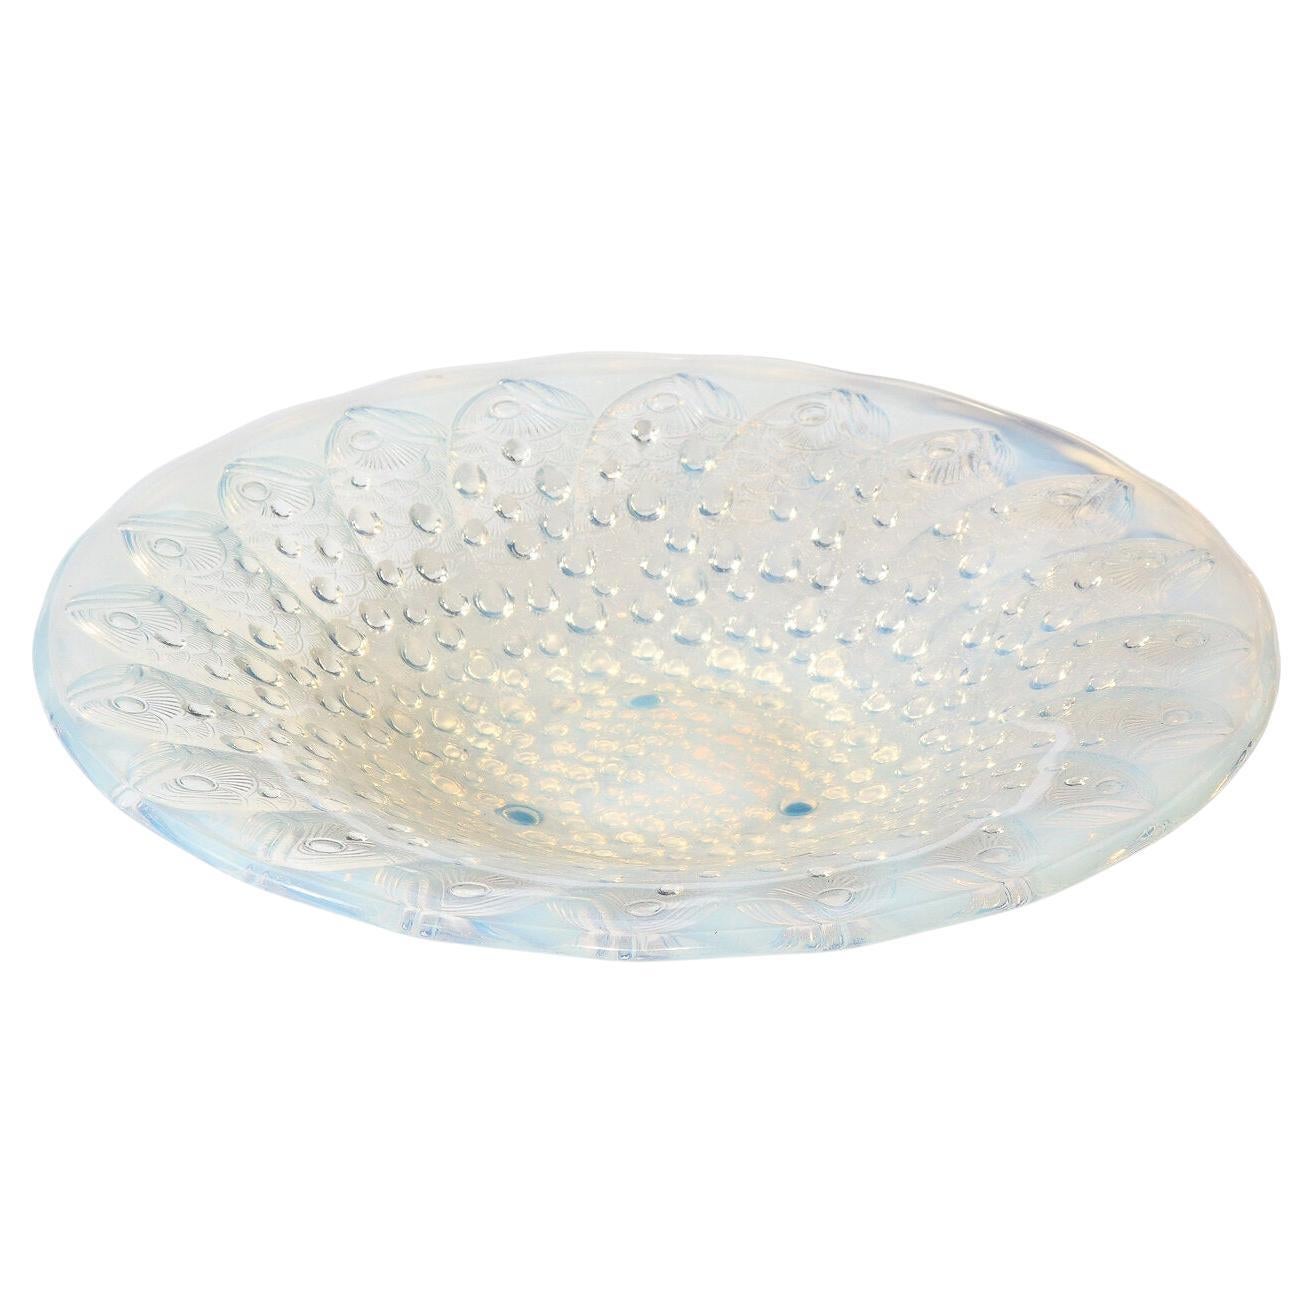 Art Deco Opalescent Glass Center Bowl with Repeating Fish Motif by Lalique For Sale